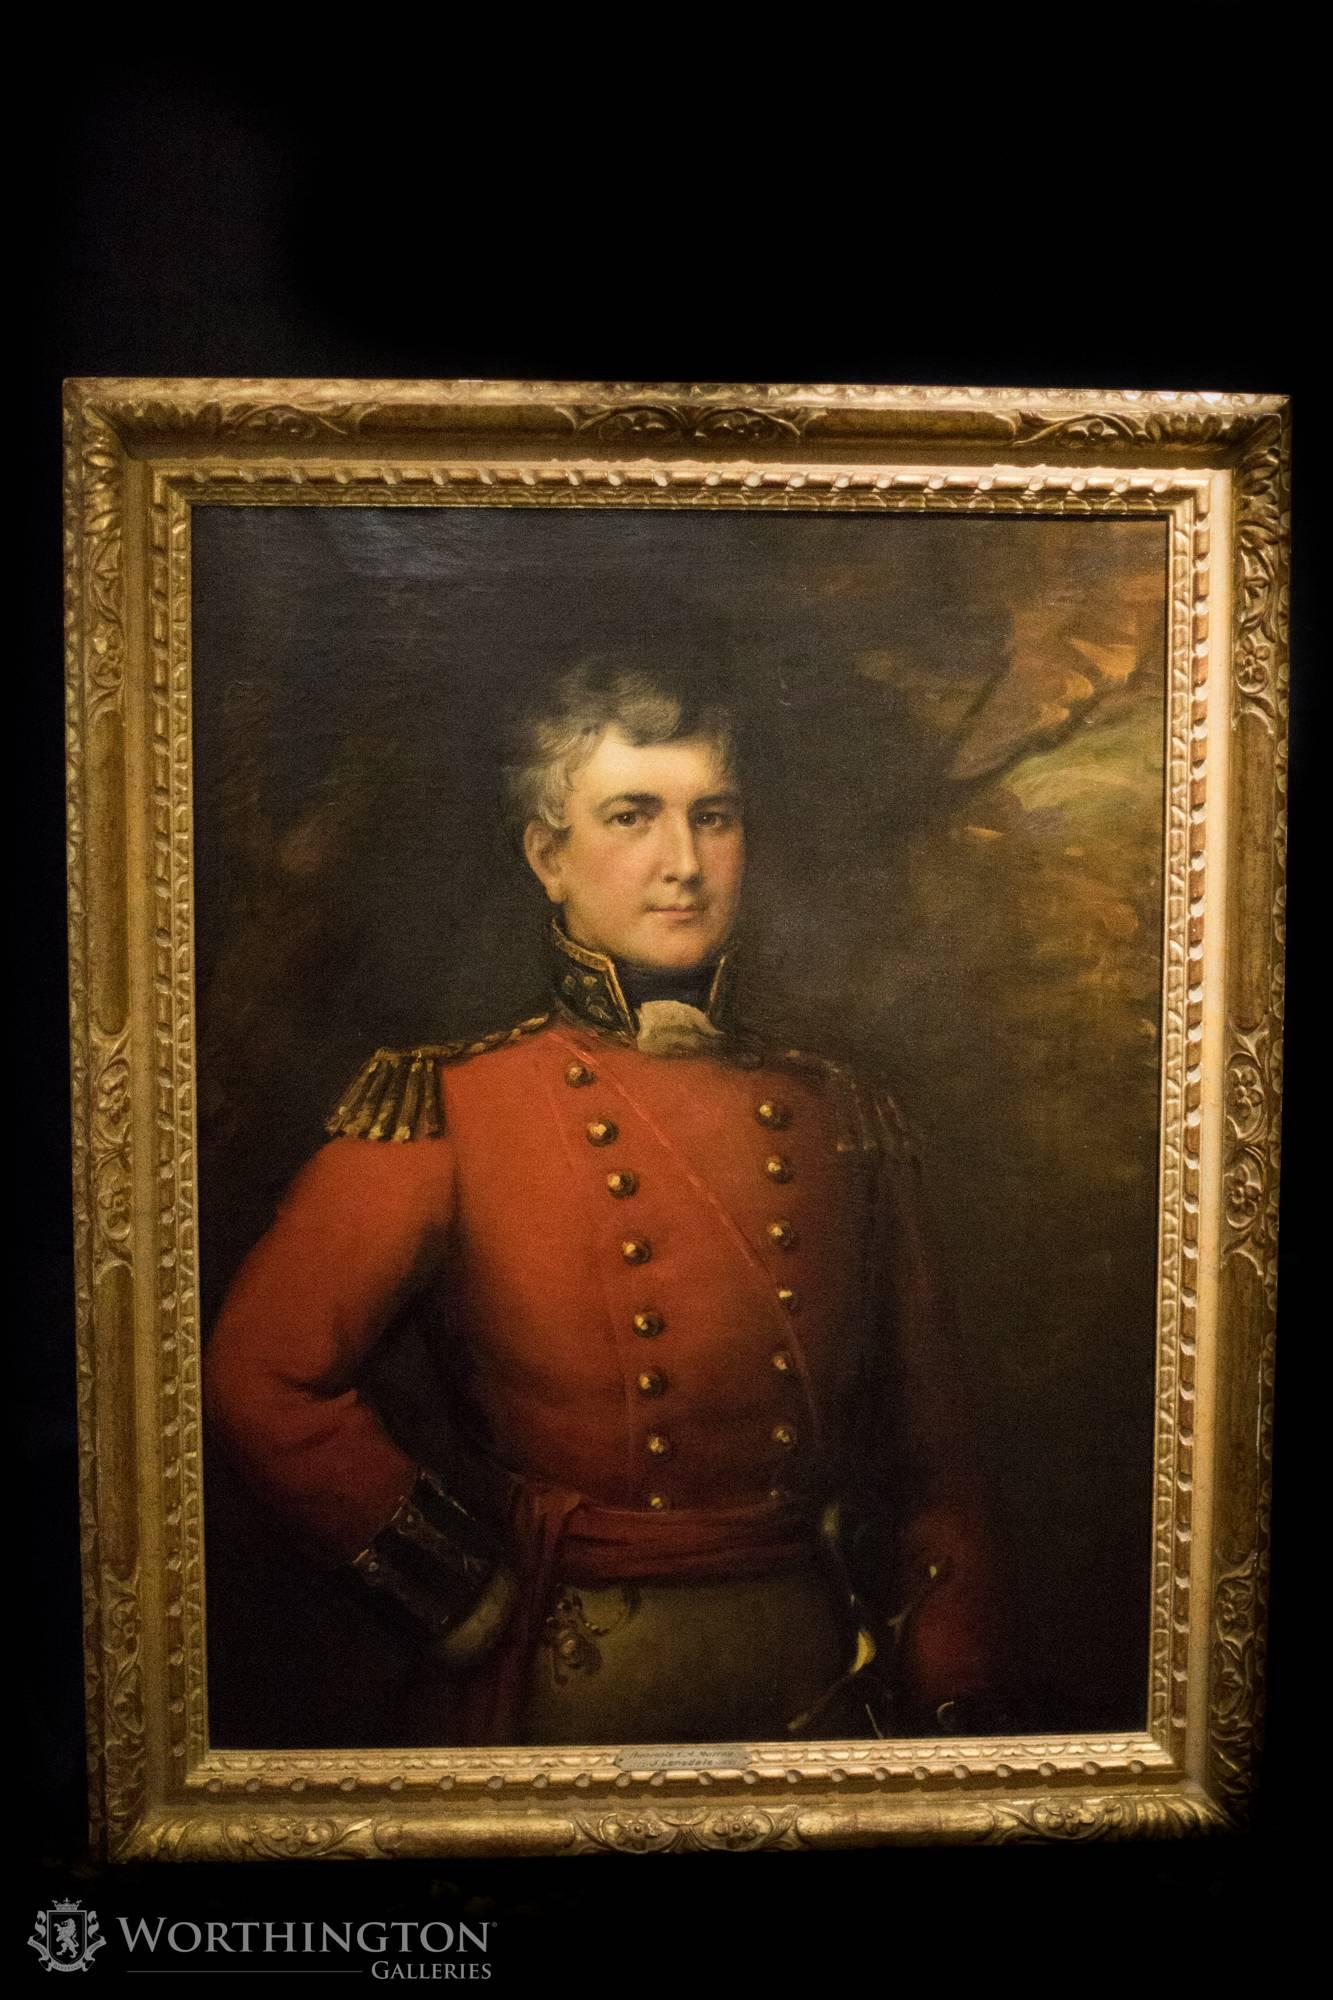 James Lonesdale Portrait Painting - 19th Century Portrait of Honorable Major Alexander Murray by James Lonsdale